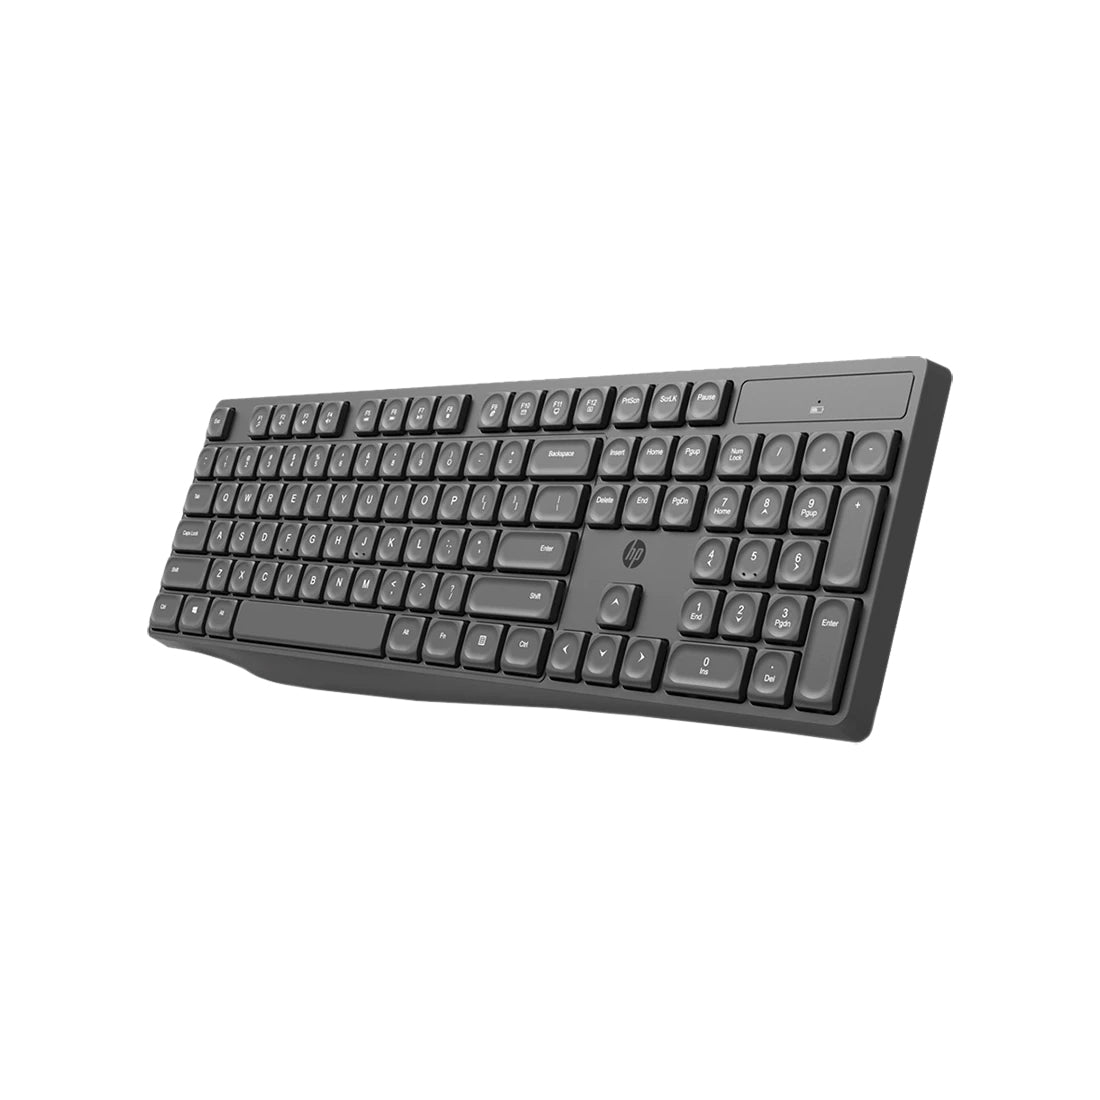 HP CS10 2.4GHz Wireless Keyboard and Optical Mouse Combo with Adjustable DPI